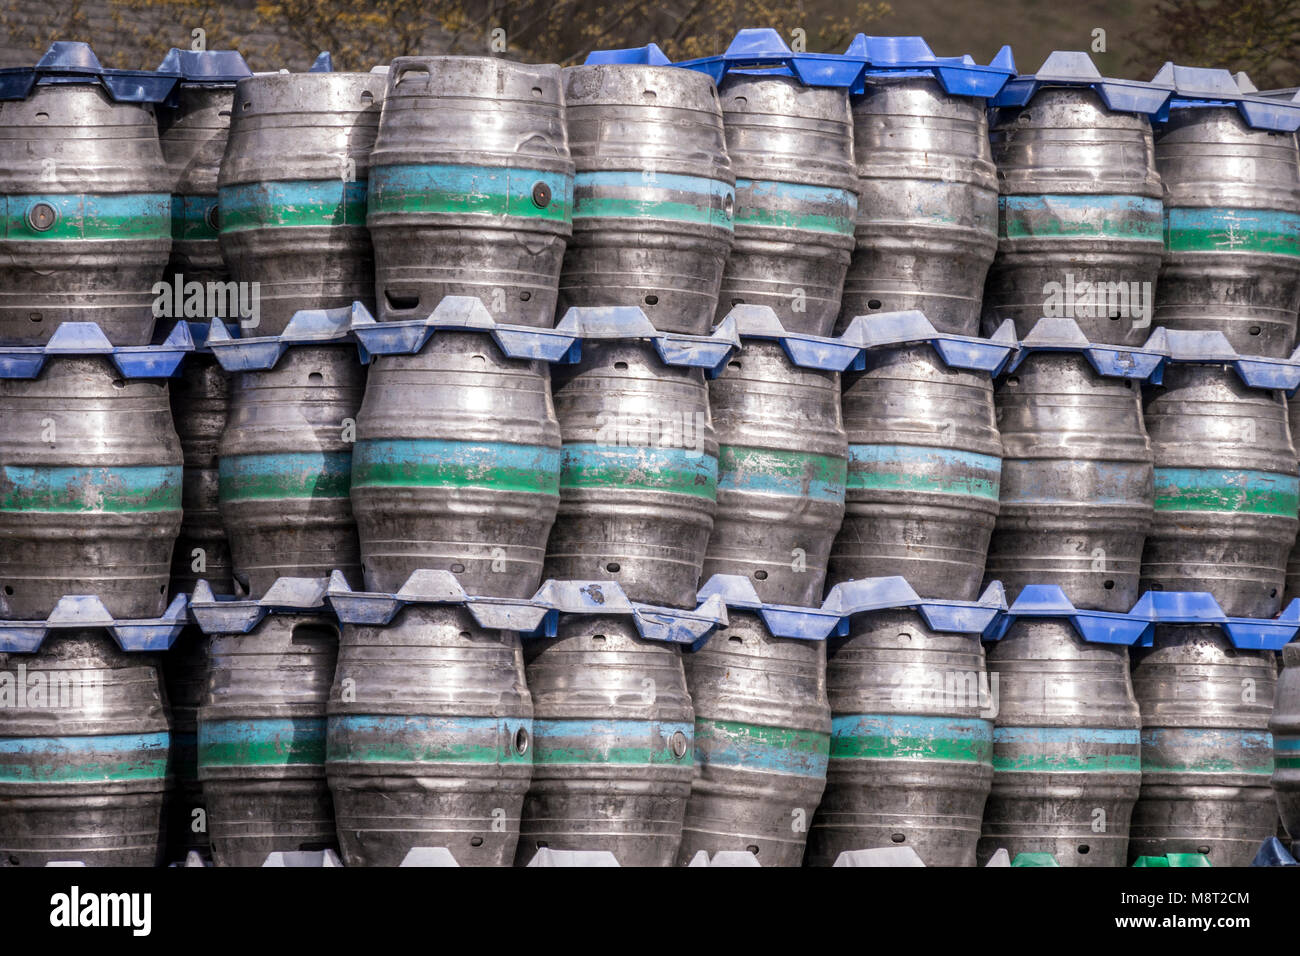 Barrels at Harvey's brewery - Lewes, East Sussex, England, UK. Stock Photo